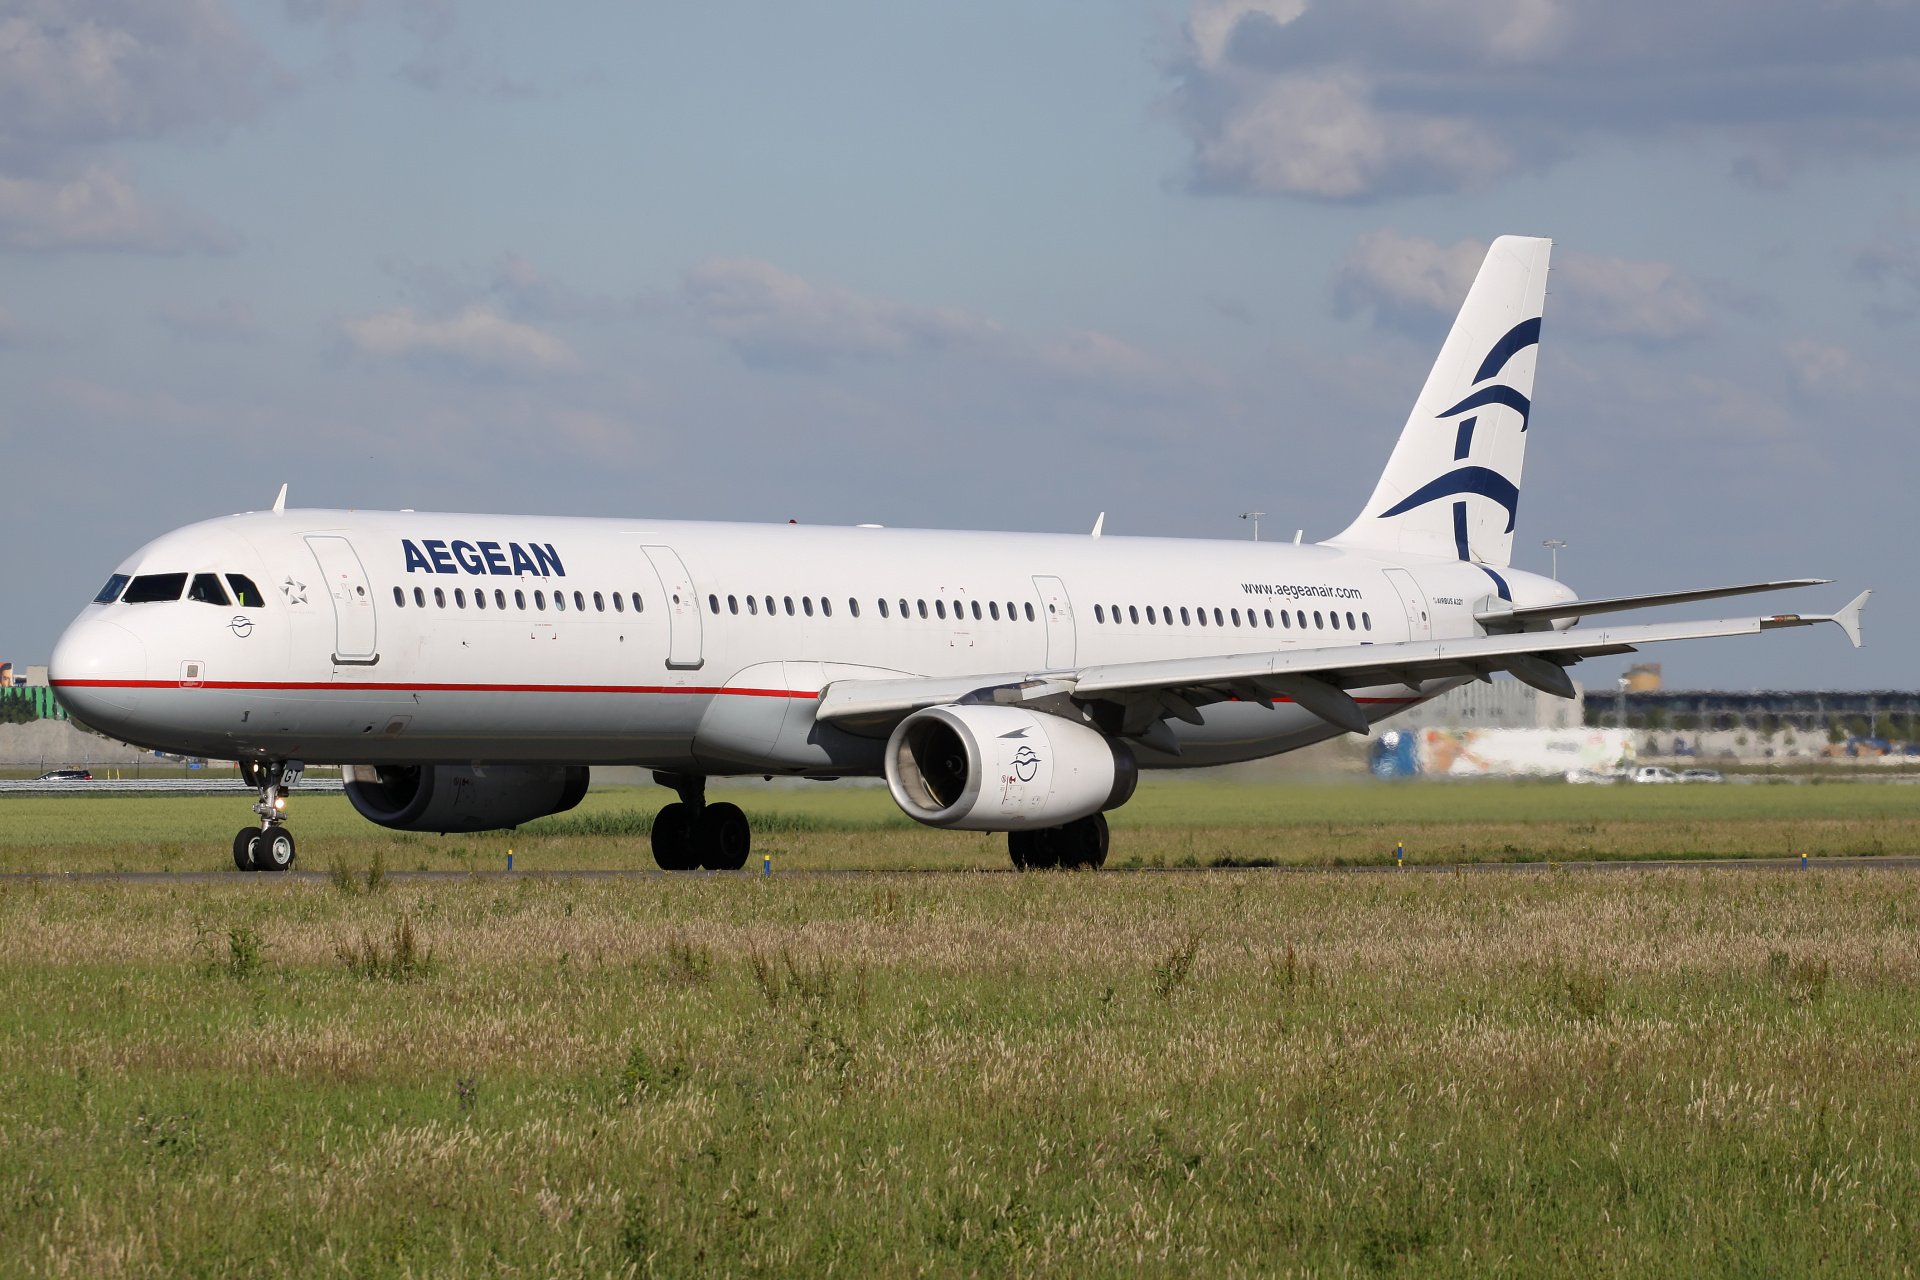 SX-DGT, Aegean Airlines (Samoloty » Spotting na Schiphol » Airbus A321-200)